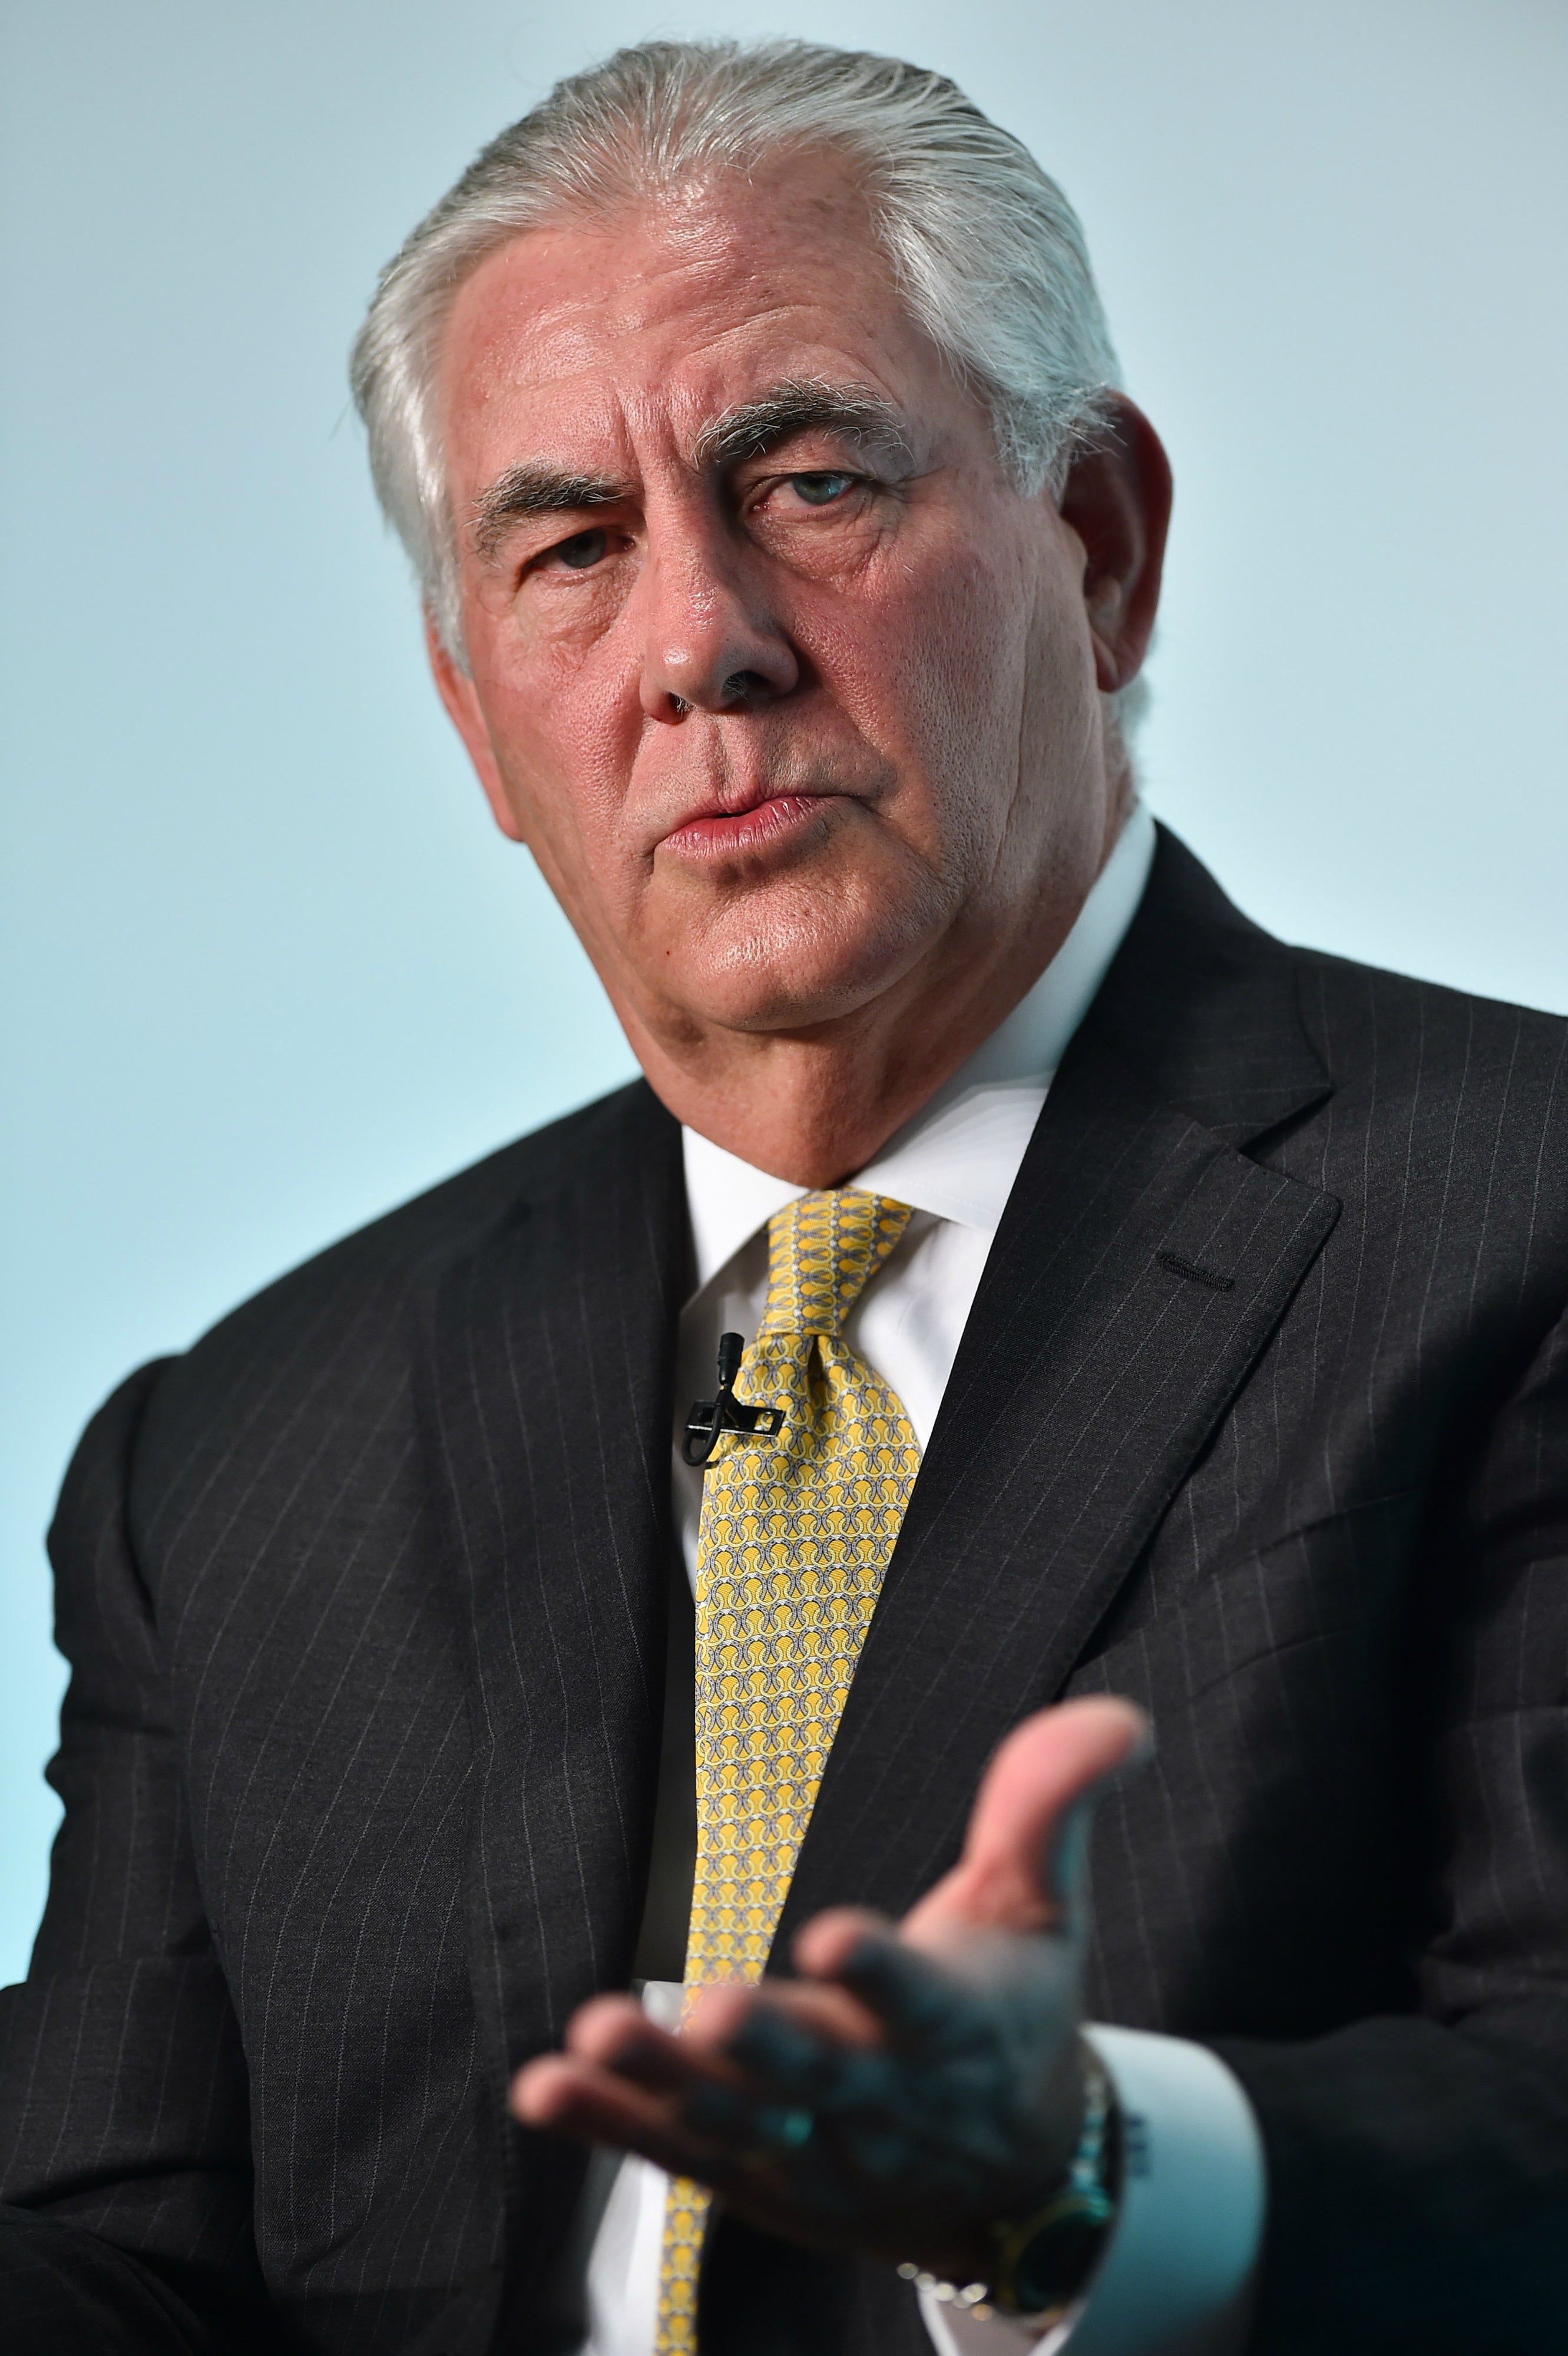 5 Things You Need To Know About Trump's Secretary Of State Pick Rex Tillerson
